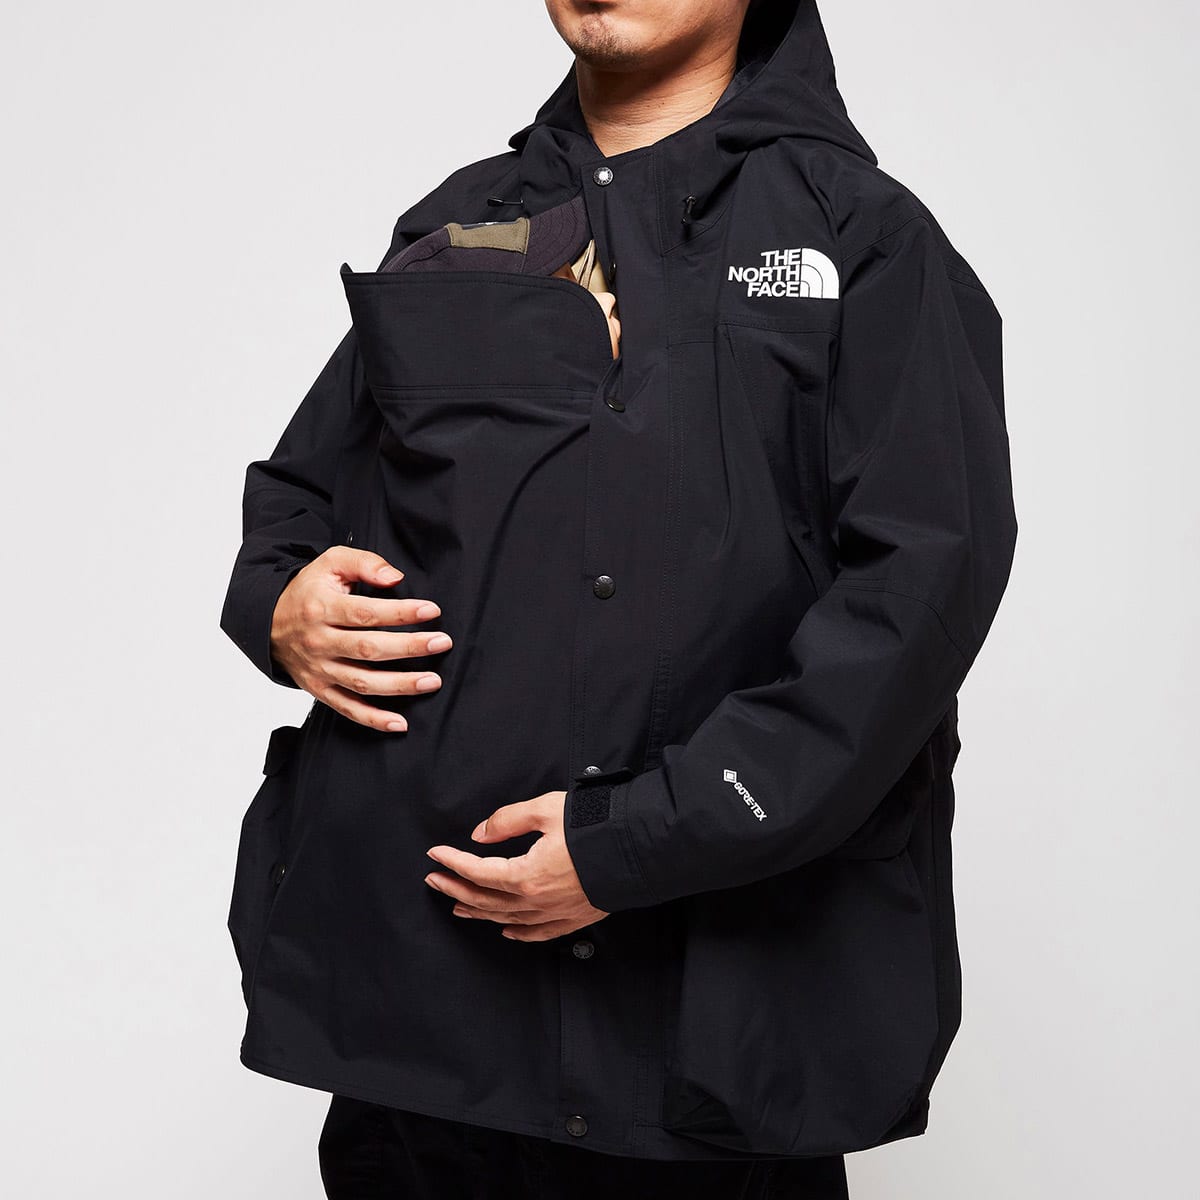 THE NORTH FACE GOTHAM JACKET III Ｌゴッサム3